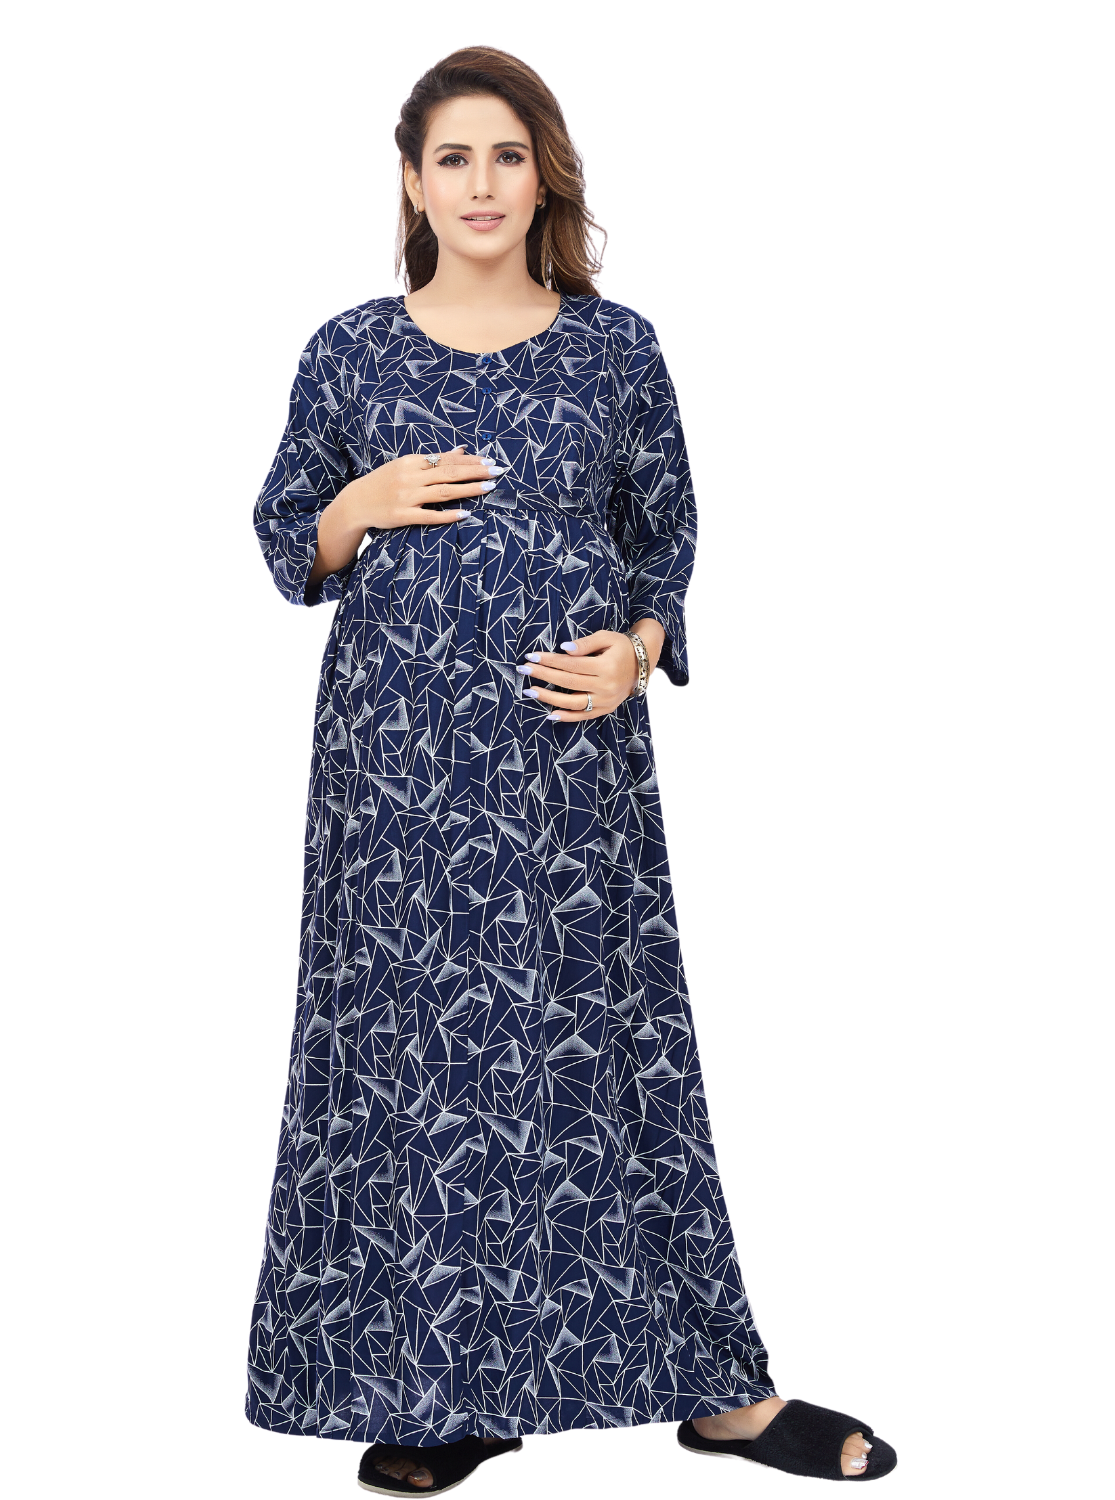 ONLY MINE New 4-IN-ONE Mom's Wear - Soft & Smooth Rayon | Maternity | Feeding | Maxi | Long Frock | Casual Wear